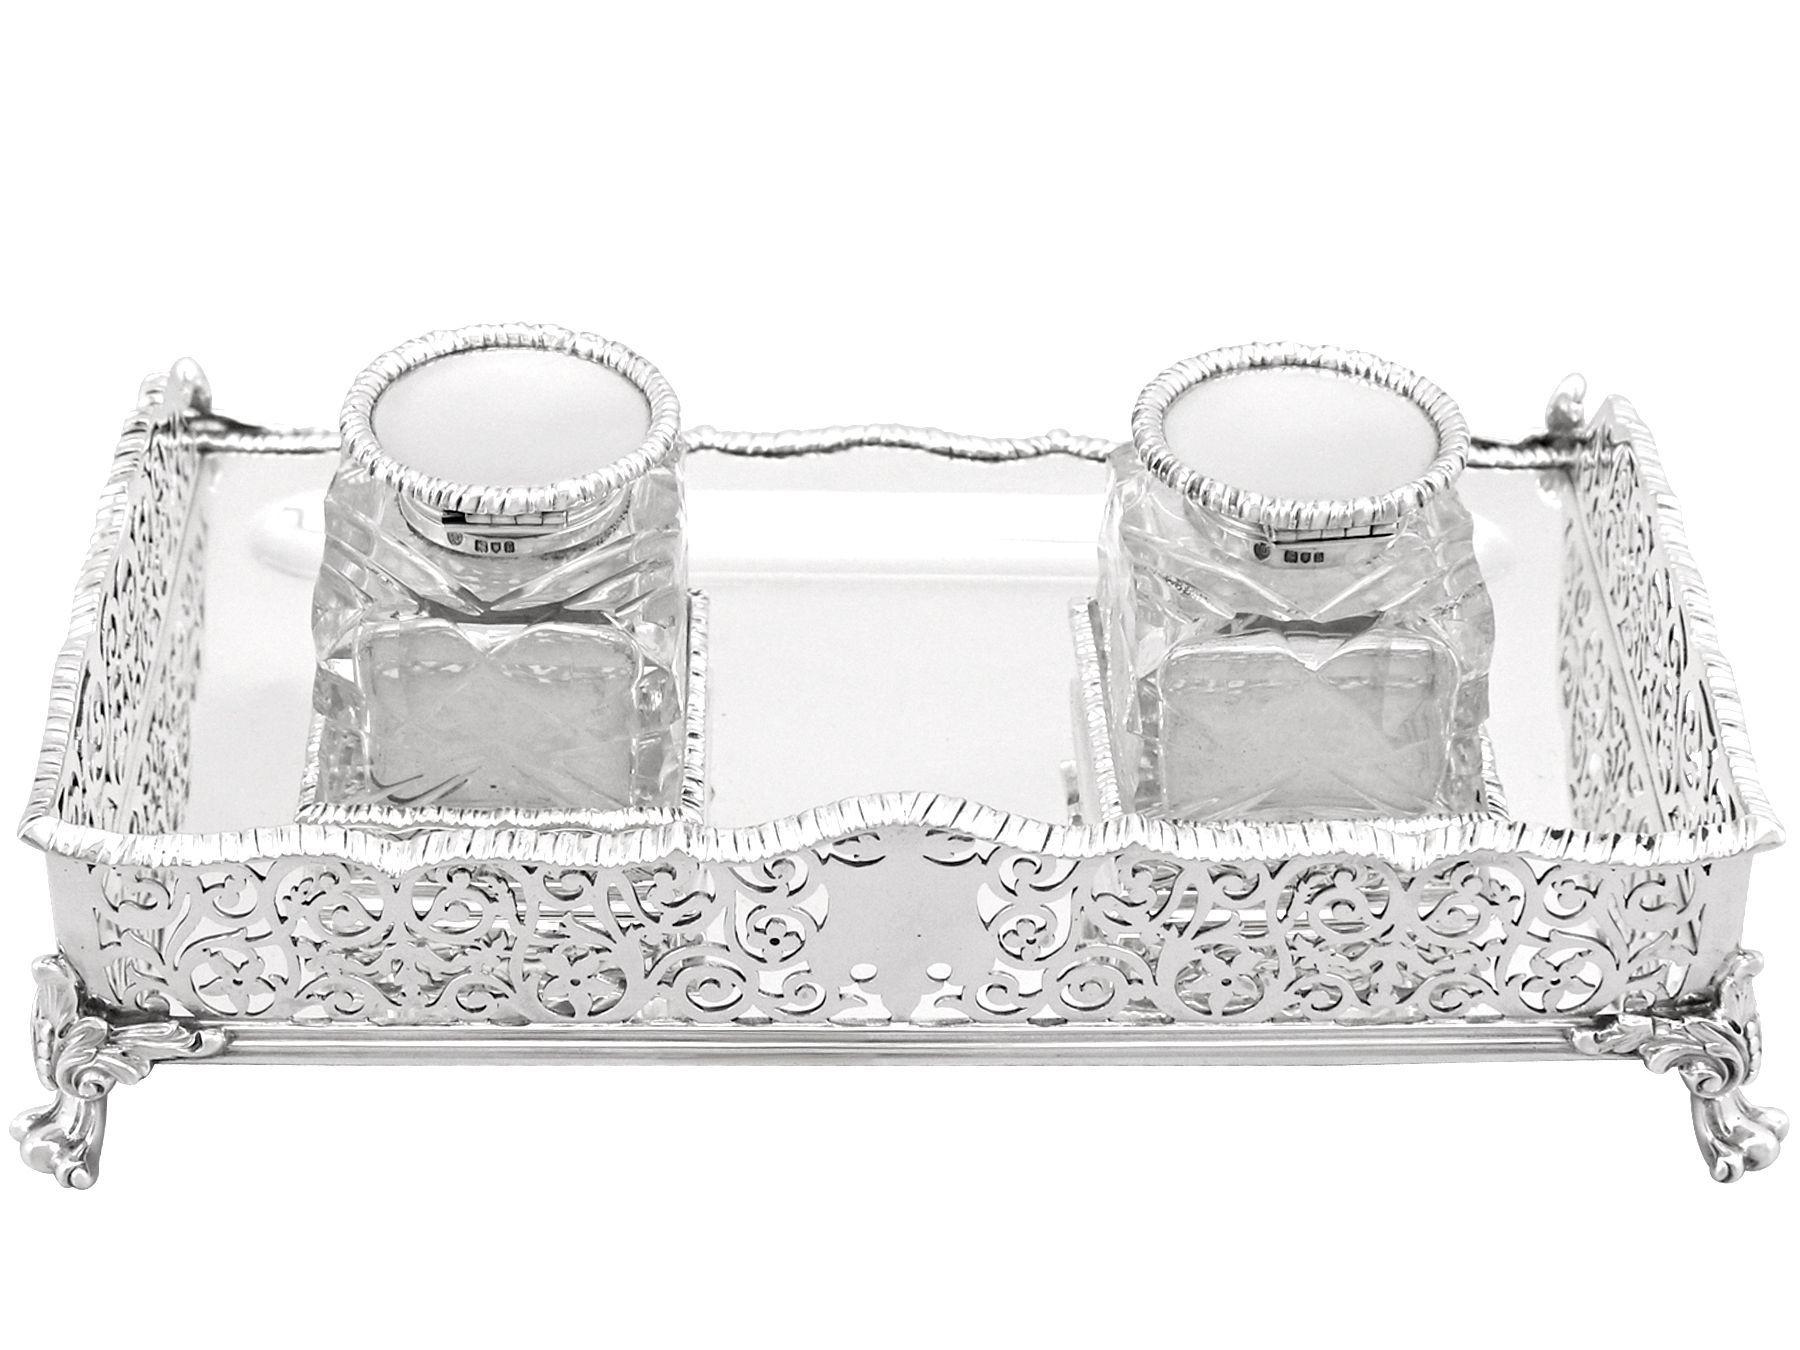 Early 20th Century Antique Edwardian Sterling Silver Gallery Inkstand by Edward Barnard & Sons Ltd